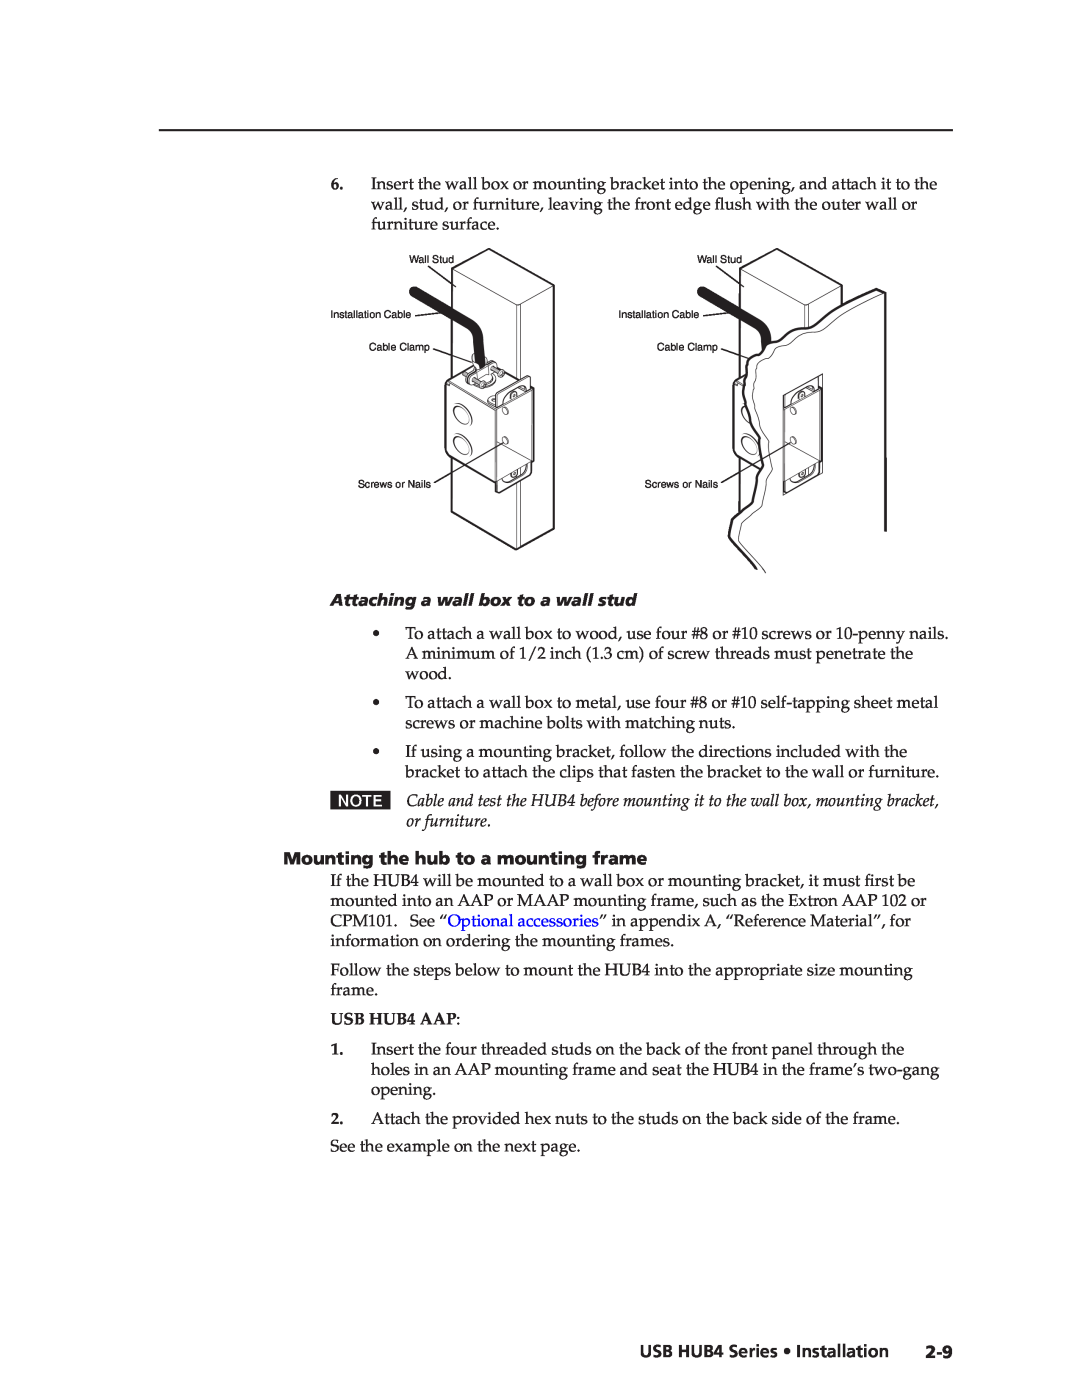 Extron electronic MAAP manual Attaching a wall box to a wall stud, Mounting the hub to a mounting frame, USB HUB4 AAP 